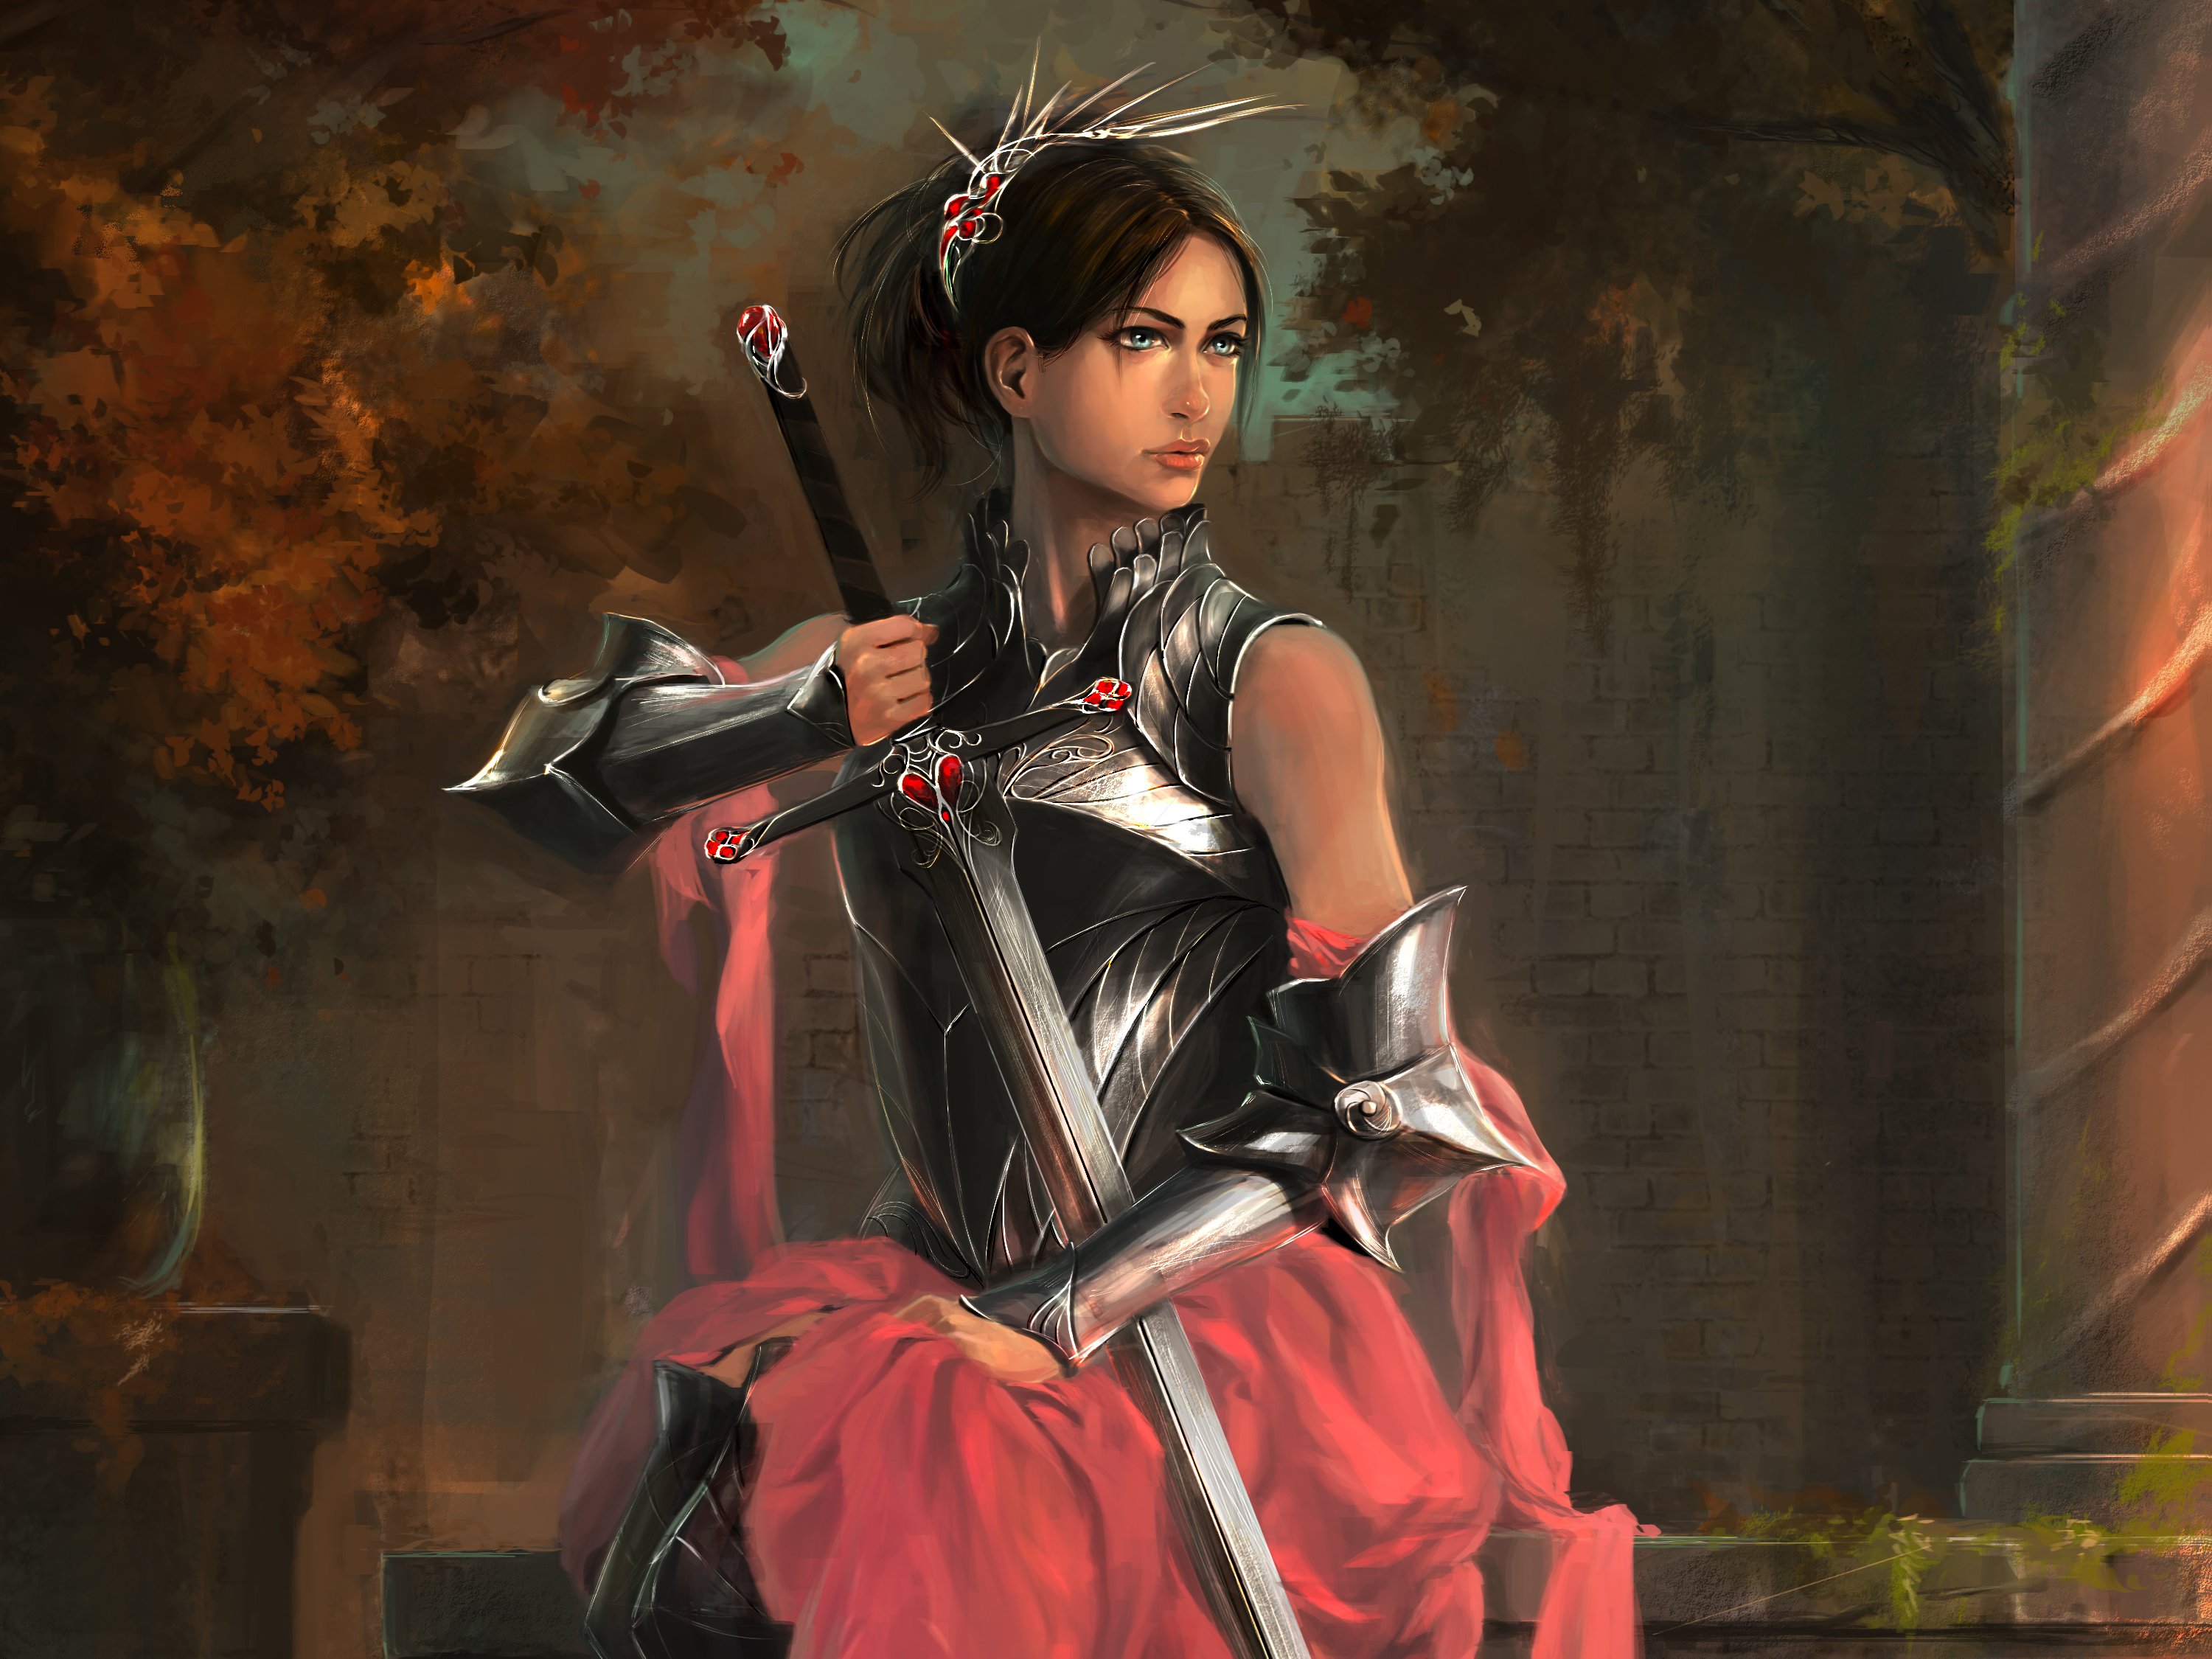 Women Warrior Full HD Wallpaper and Background Image 